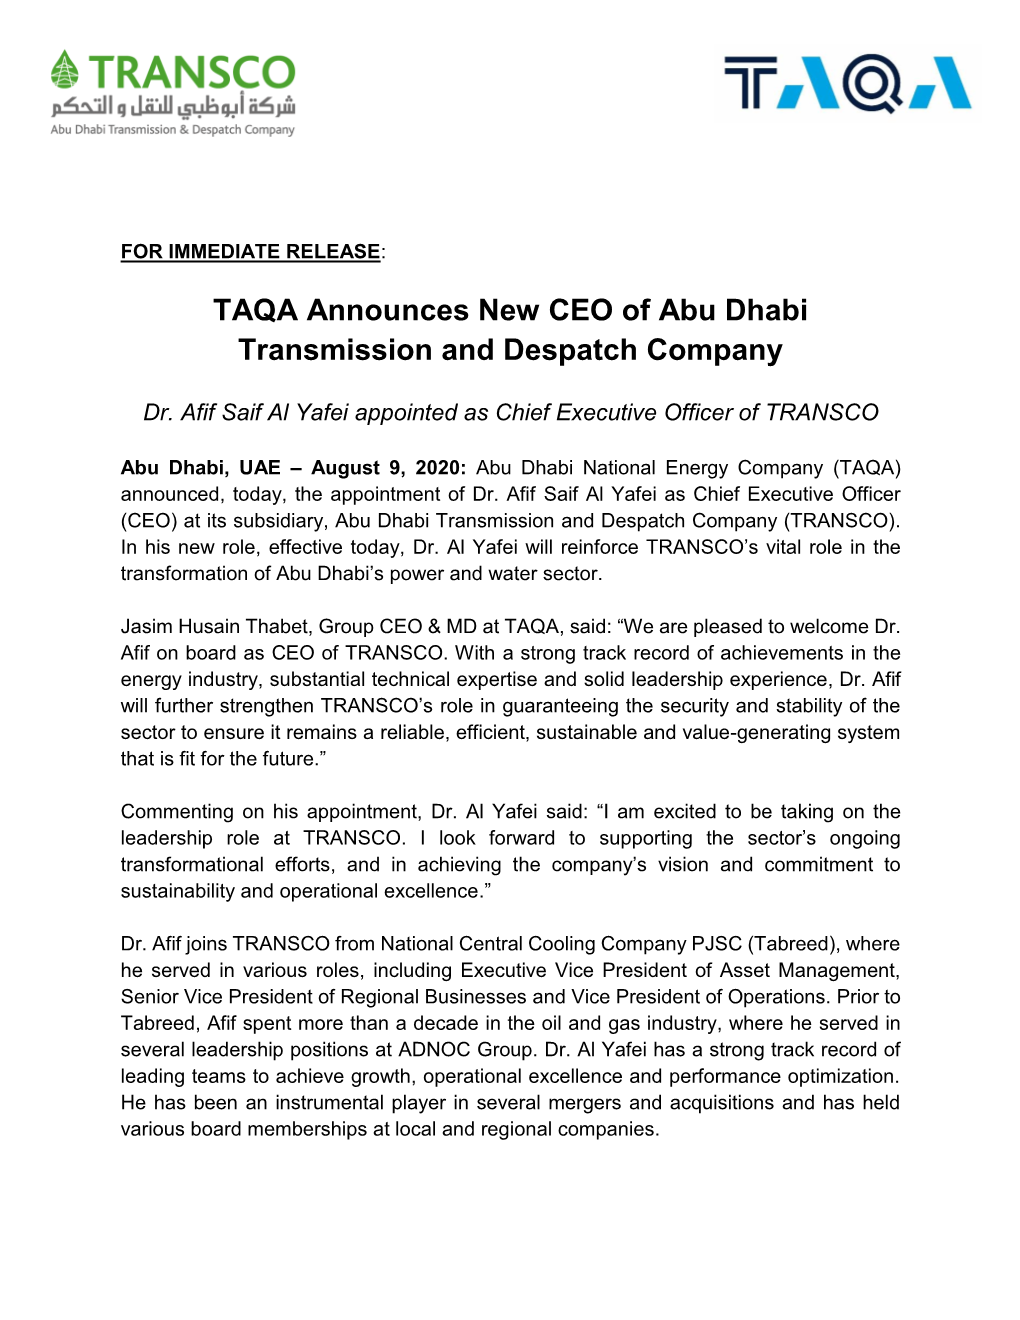 TAQA Announces New CEO of Abu Dhabi Transmission and Despatch Company